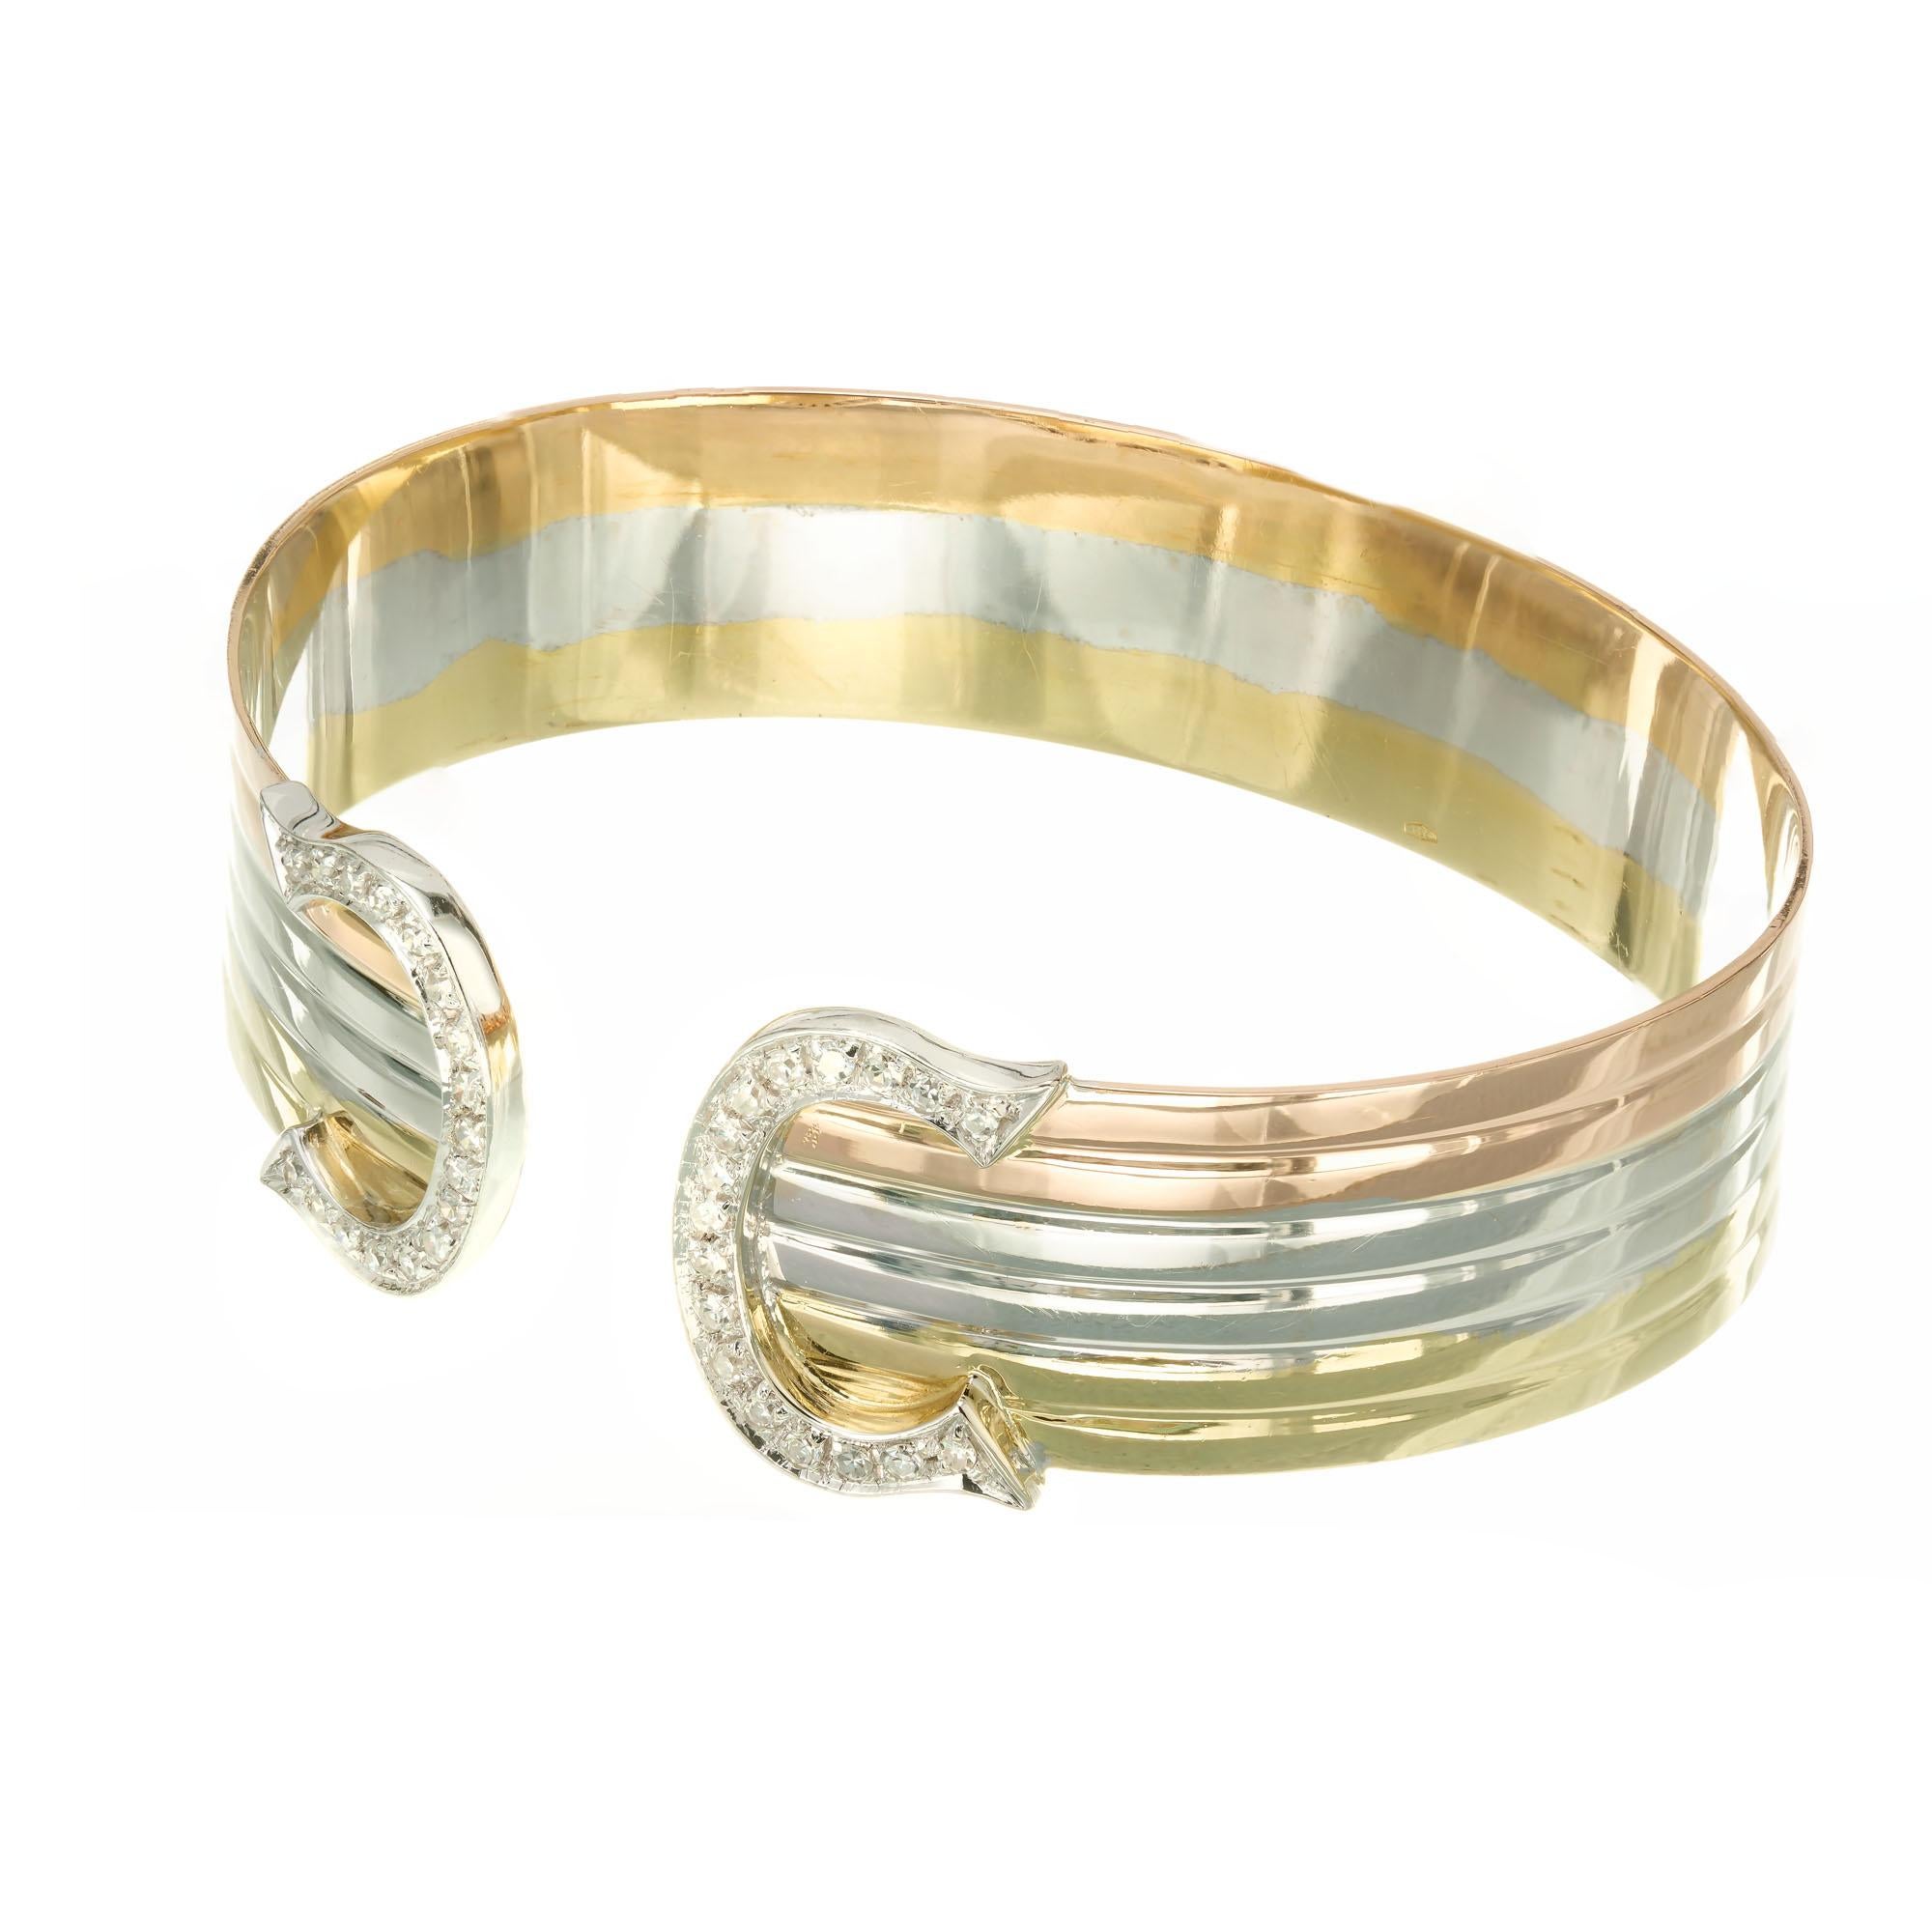 Diamond and Tri-color gold slip on cuff bracelet. 18k yellow, rose and white gold cuff with double  